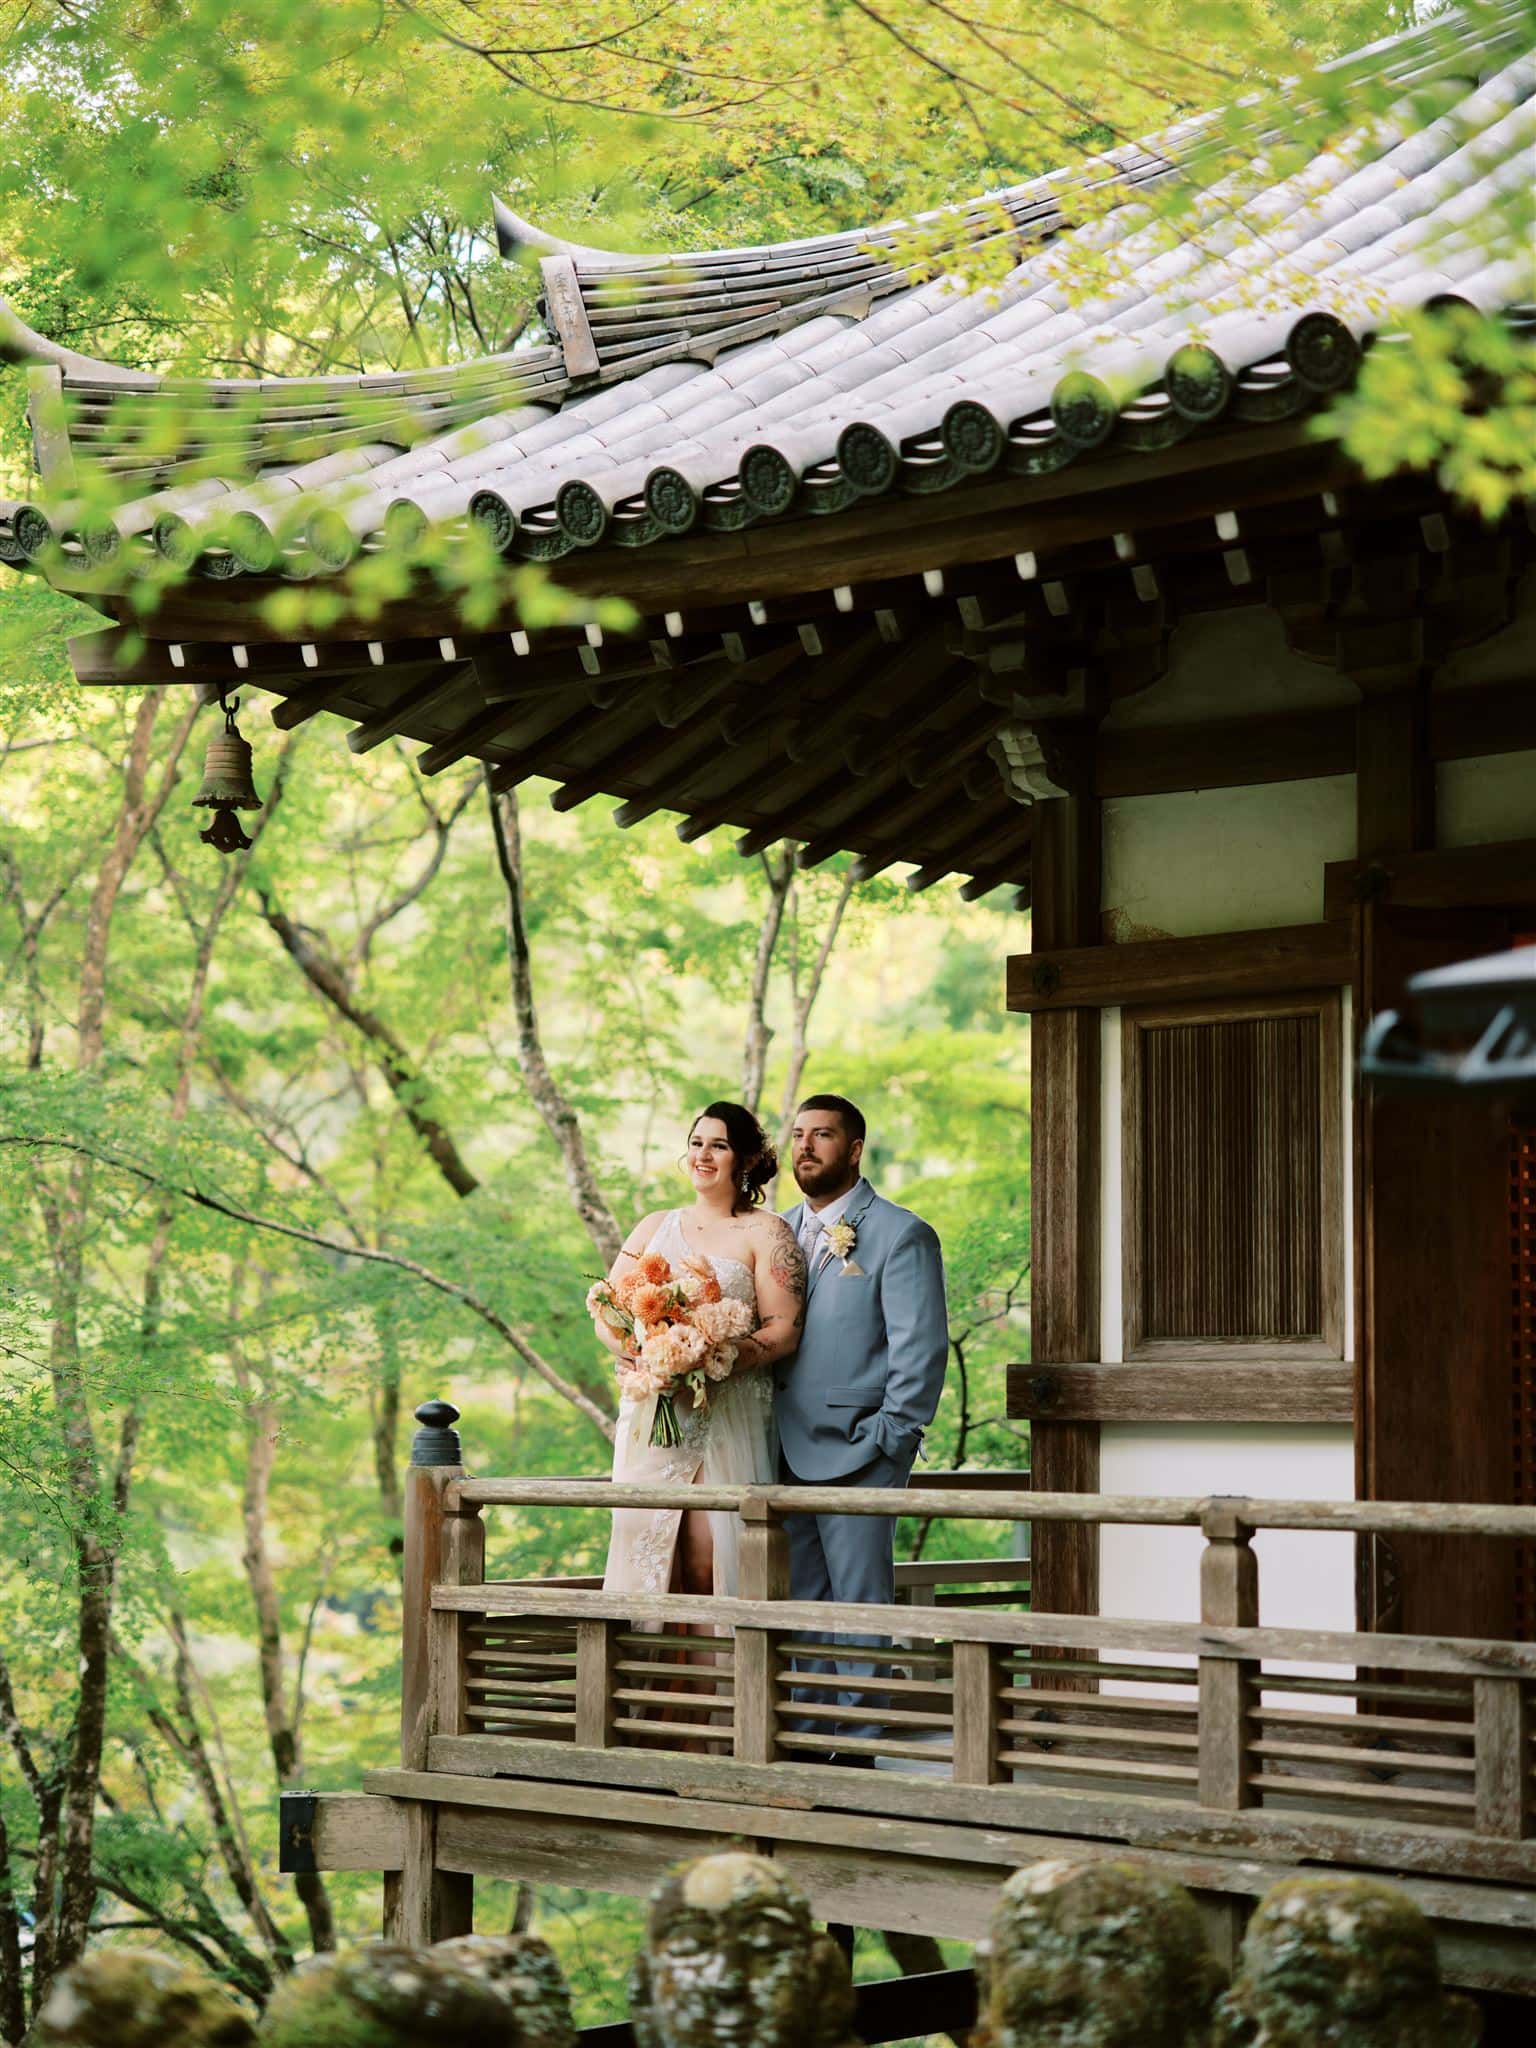 Japan Elopement Wedding Photographer, Planner & Videographer | Kyoto Wedding & Elopement Package featuring a bride and groom standing on the porch of a Japanese temple